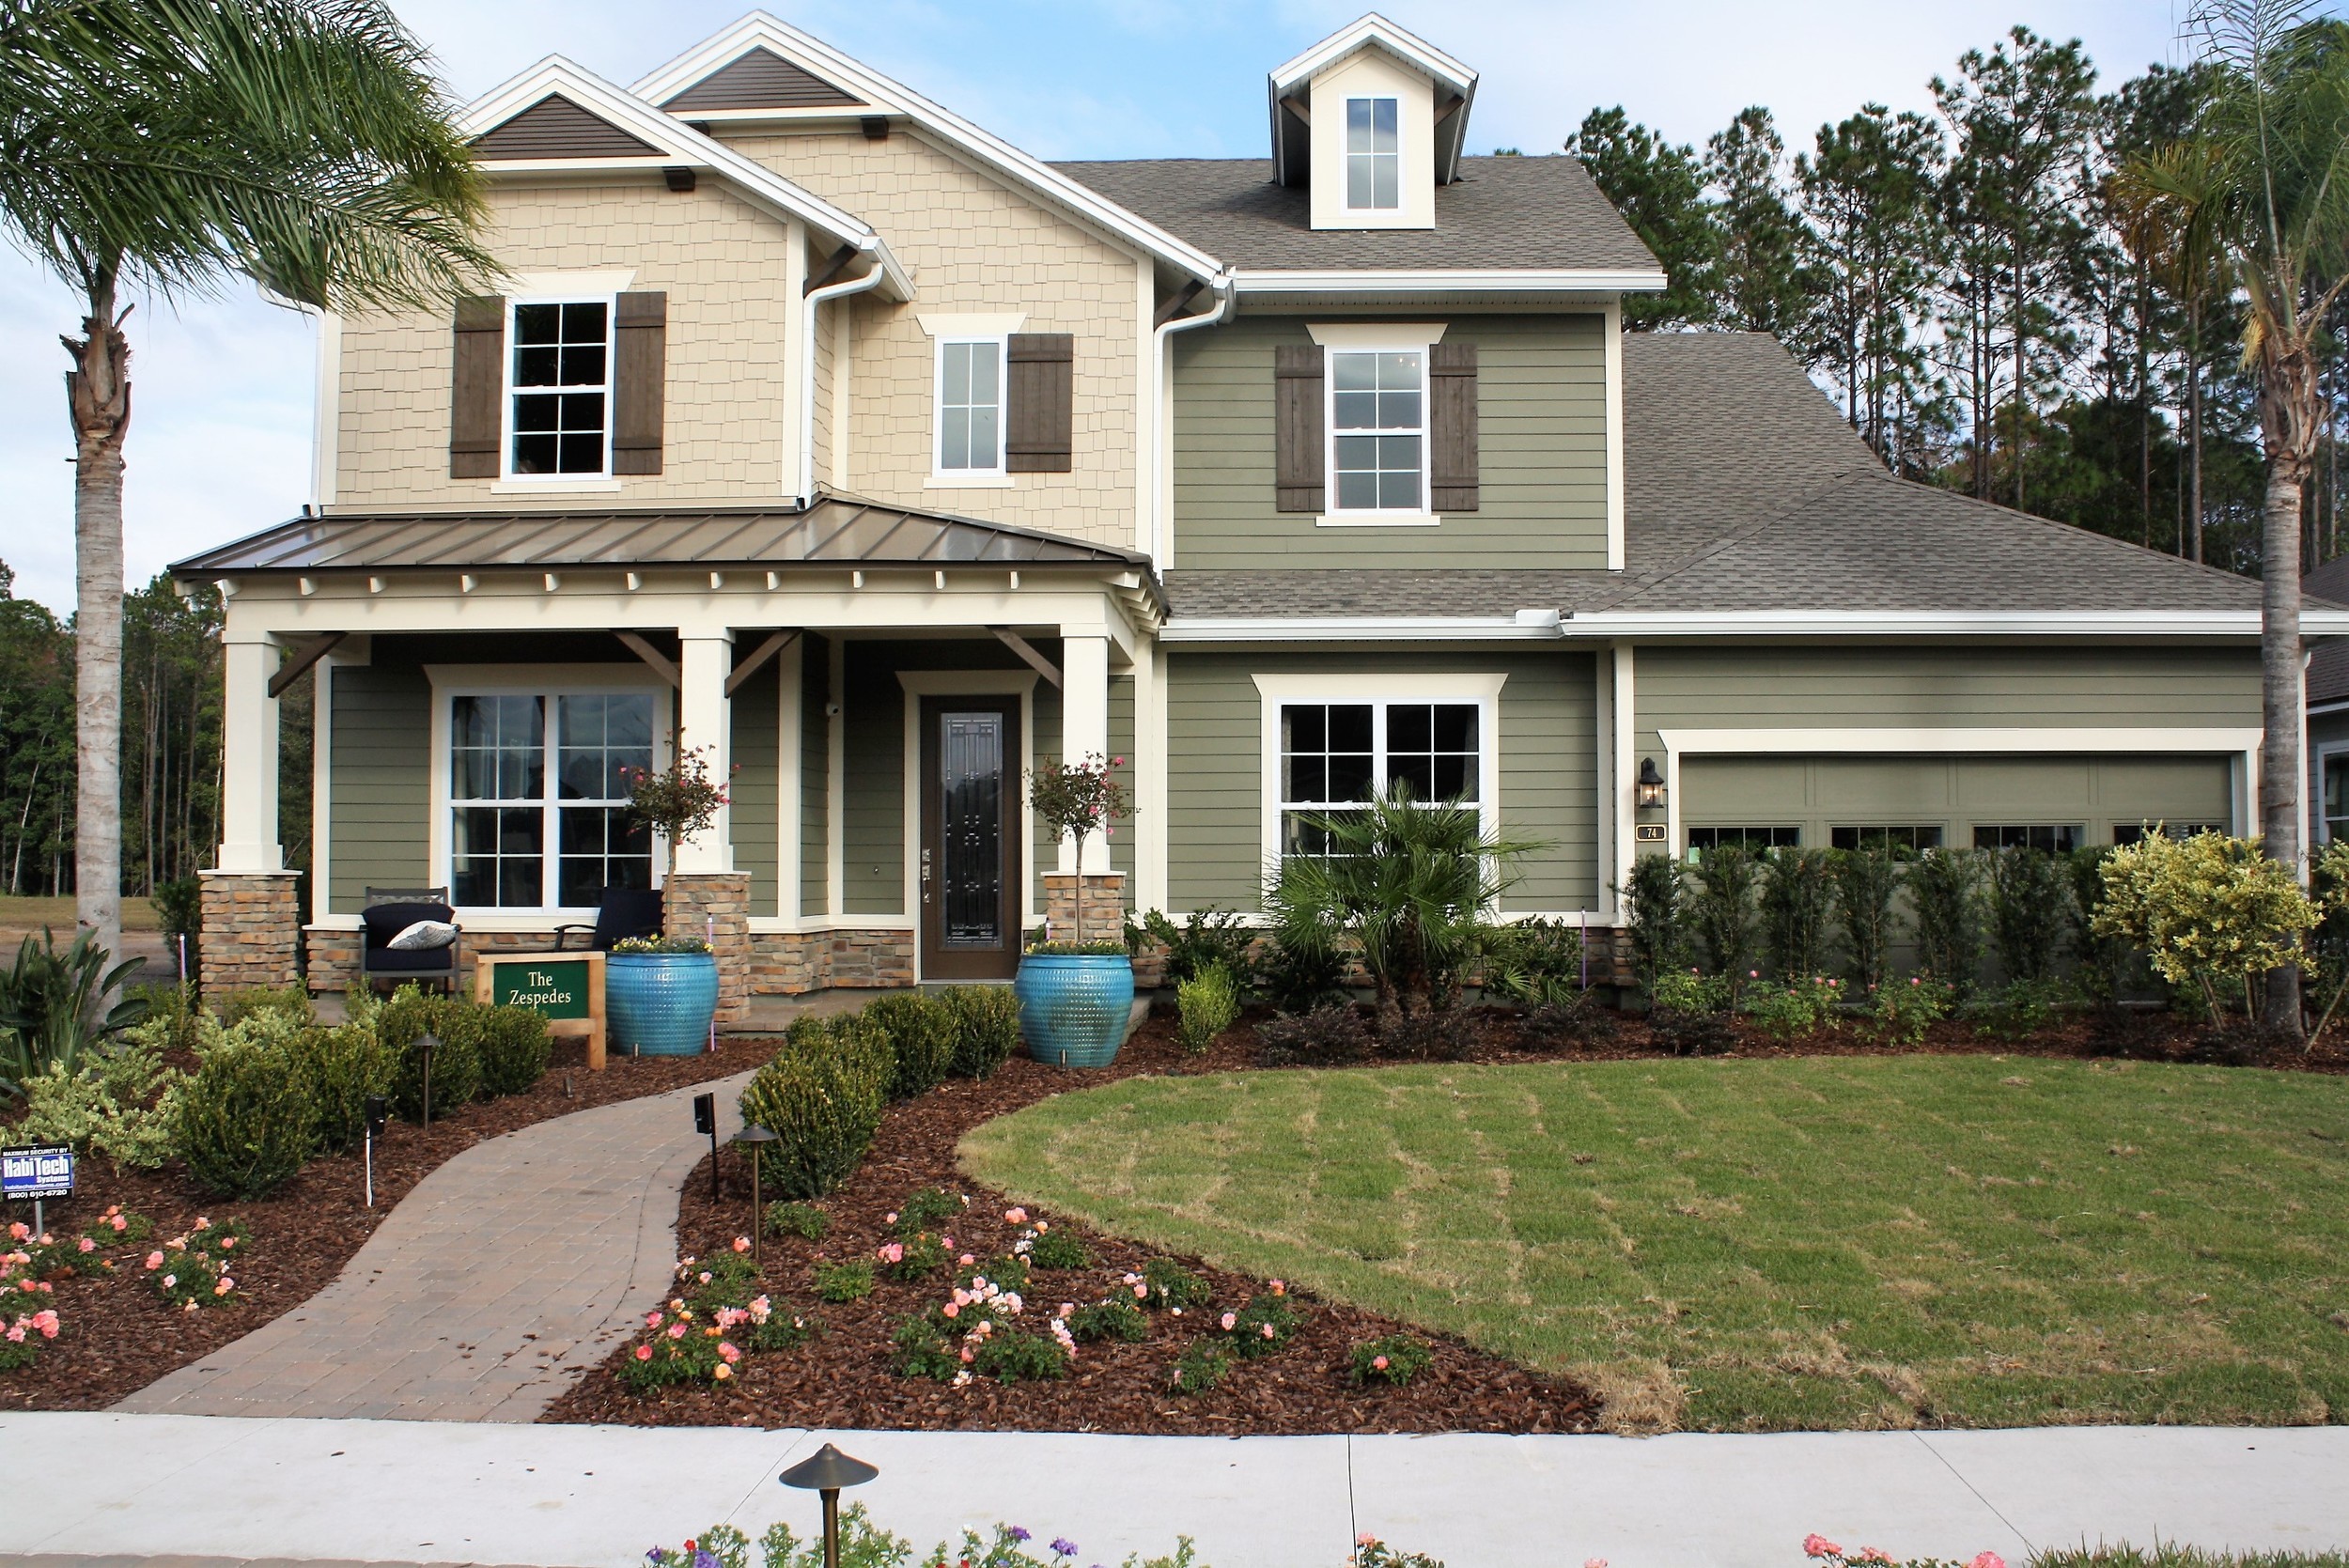 Nocatee offerings: Home buyers can choose from dozens of distinct neighborhoods and home styles, like this home in Nocatee’s Twenty Mile community.